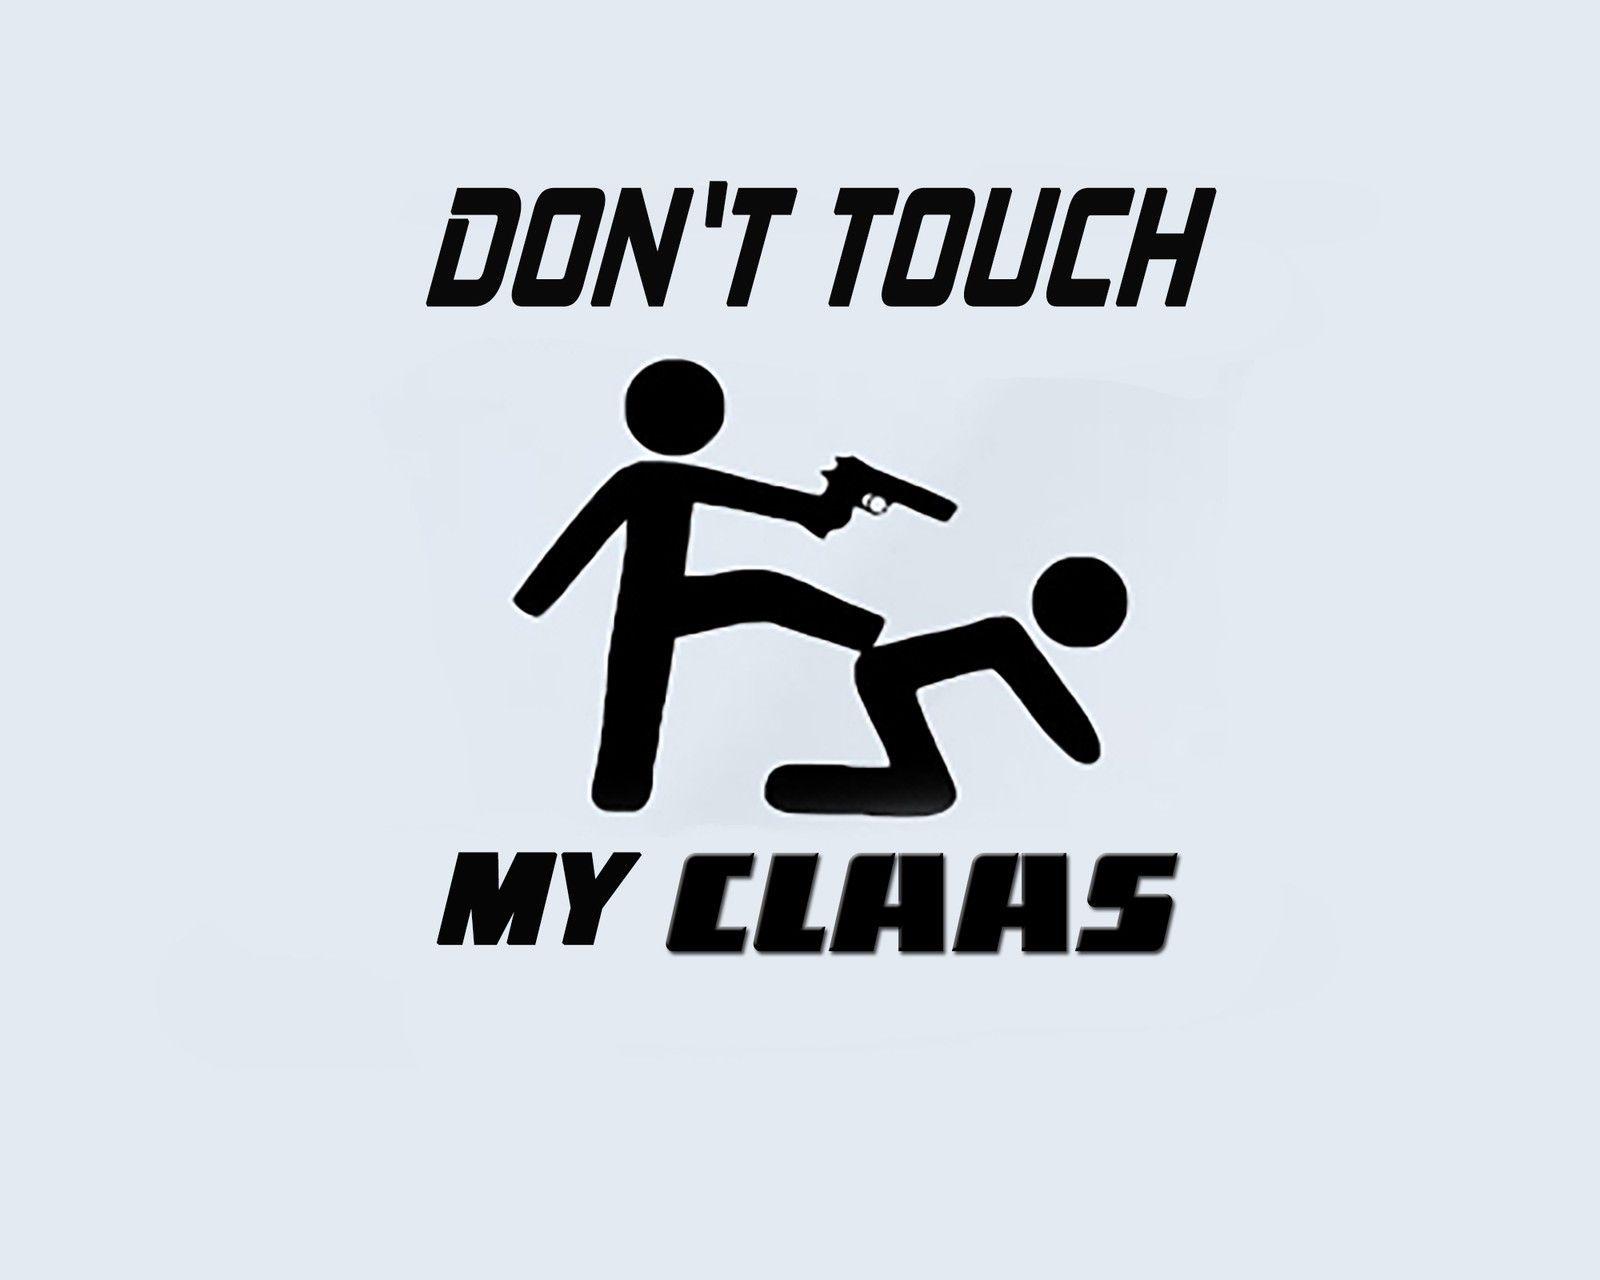 Claas Tractor Logo - Don't Touch My Claas Tractor Farm Machinery Lorry Sticker Film Logo